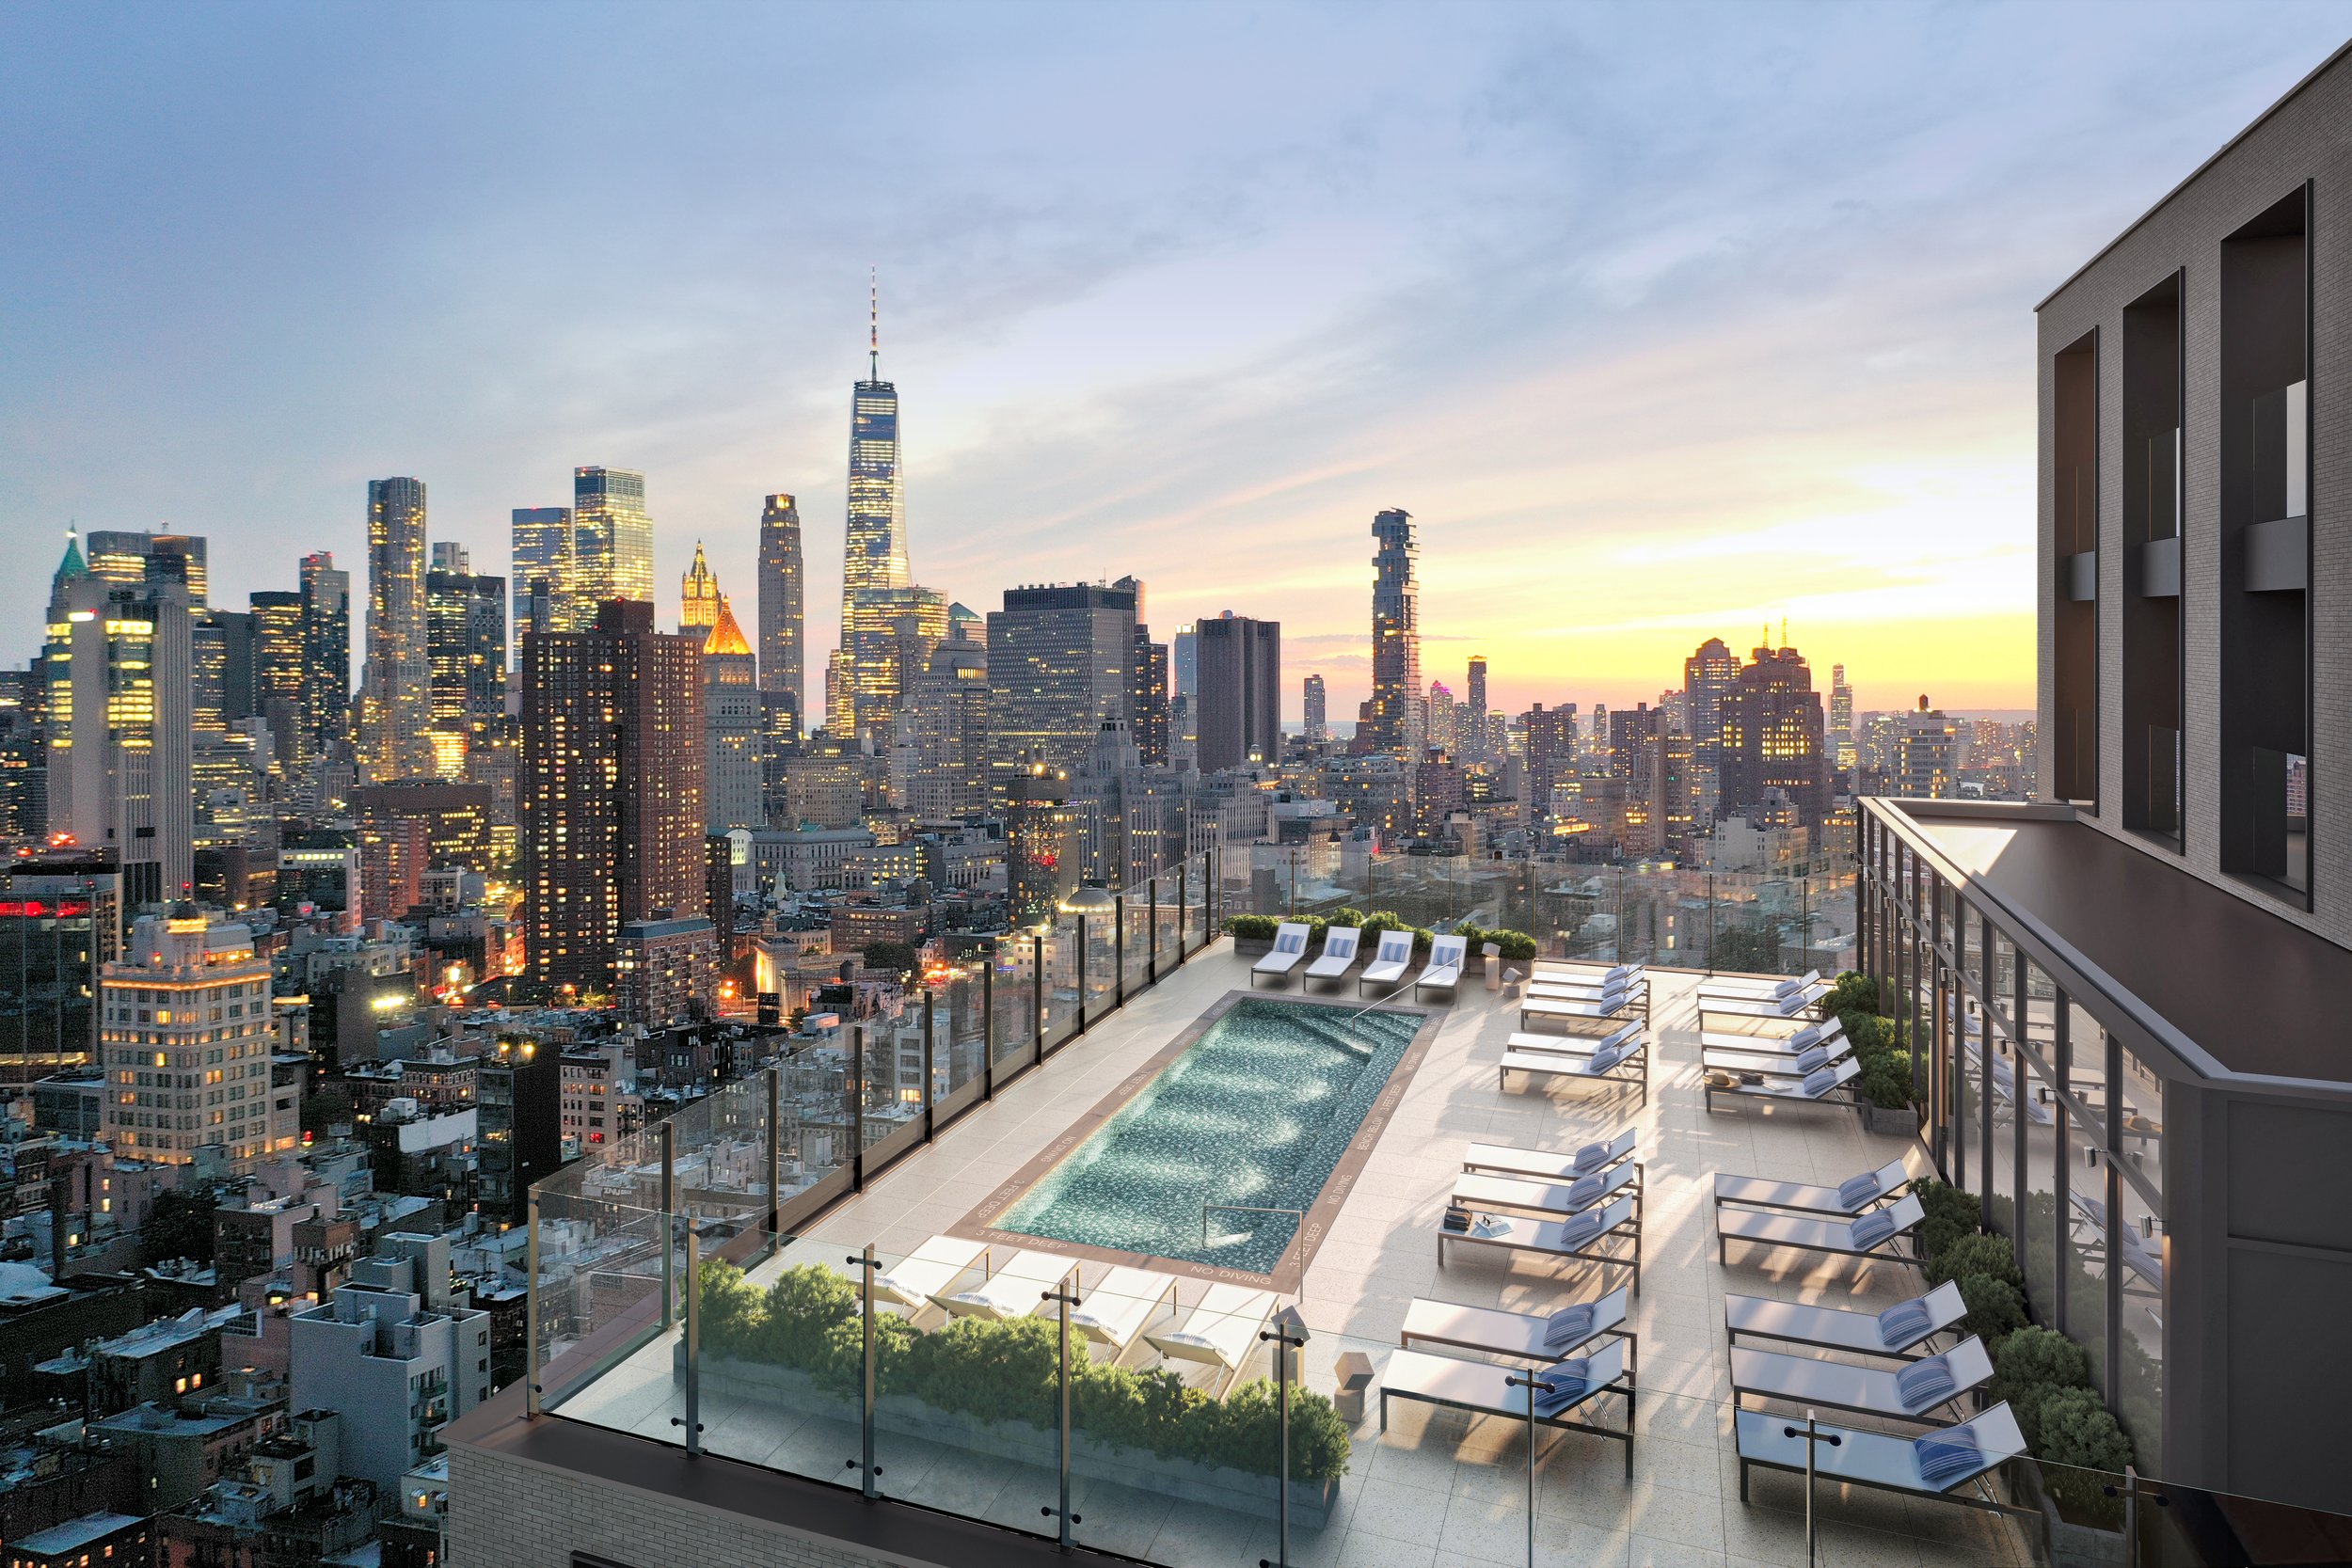  The Gotham Organization today revealed the first look at its newest luxury rental development, The Suffolk. Located at 55 Suffolk in the Lower East Side, the 30-story tower includes 378 residences with 330,000 square feet of mixed-use space and is s